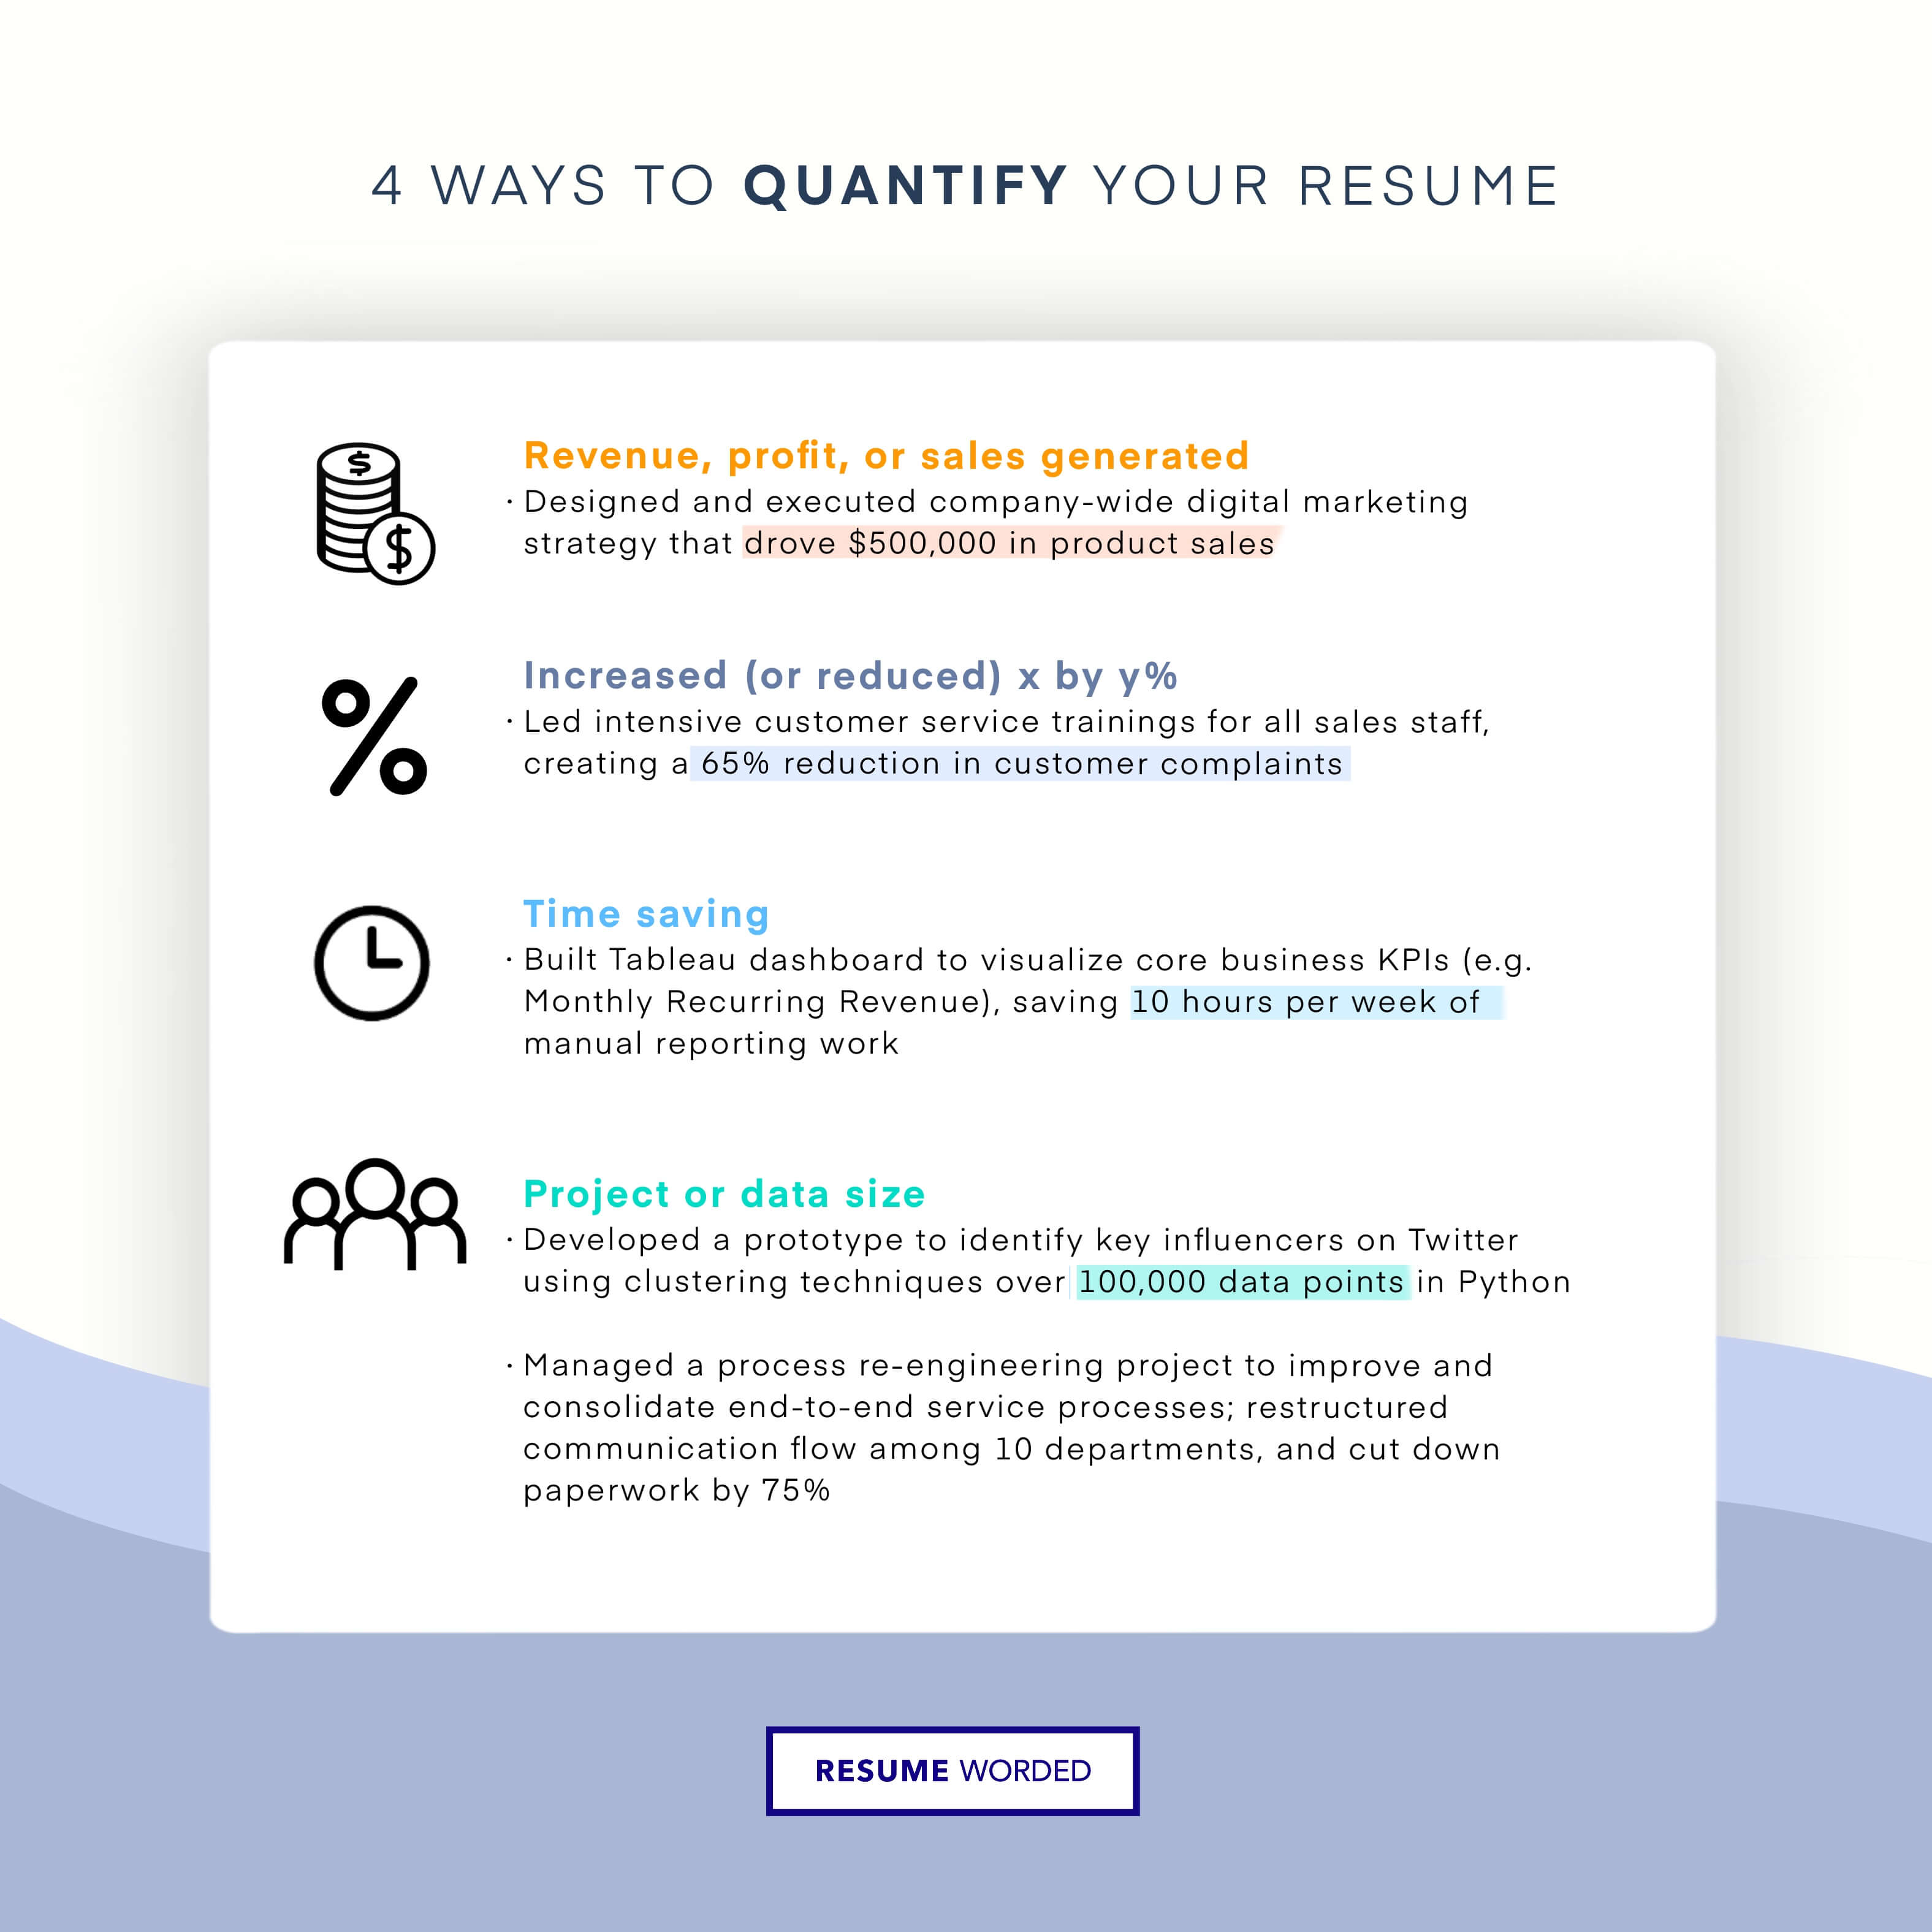 Quantify your output. - Compliance Attorney Resume